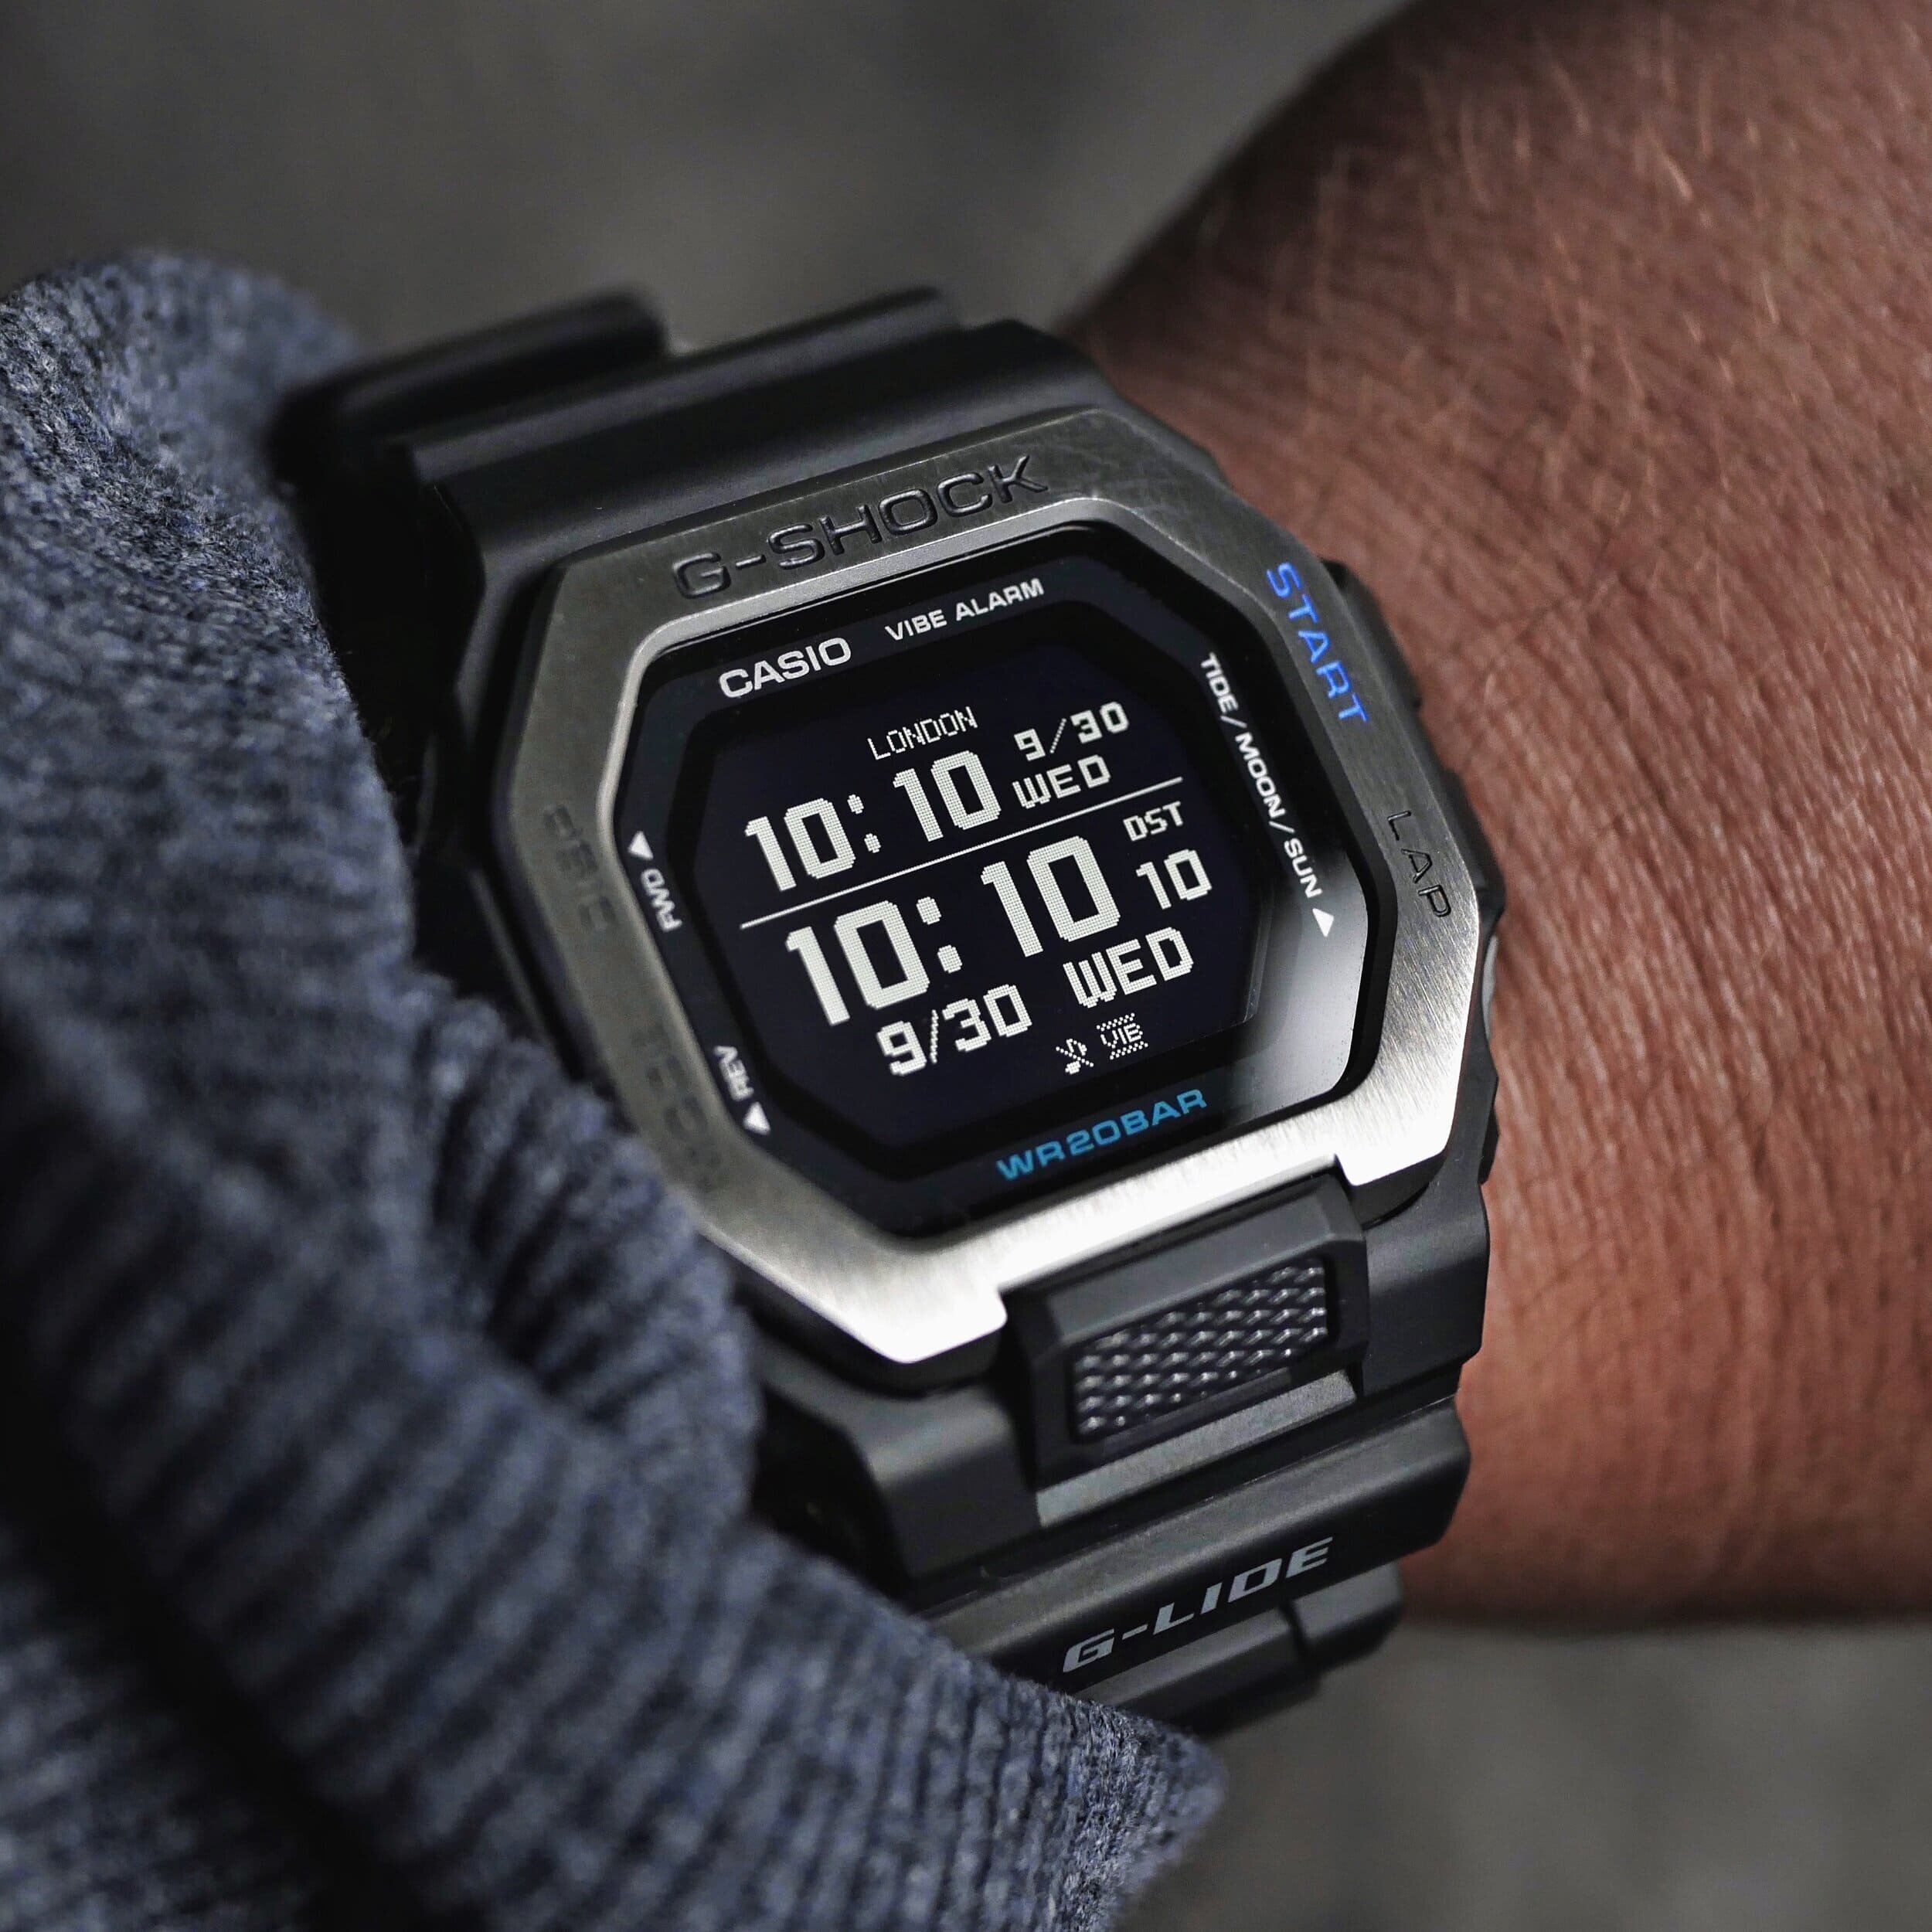 Casio G-Shock GBX100 G-Lide Watch Review: Is It the Best Surf